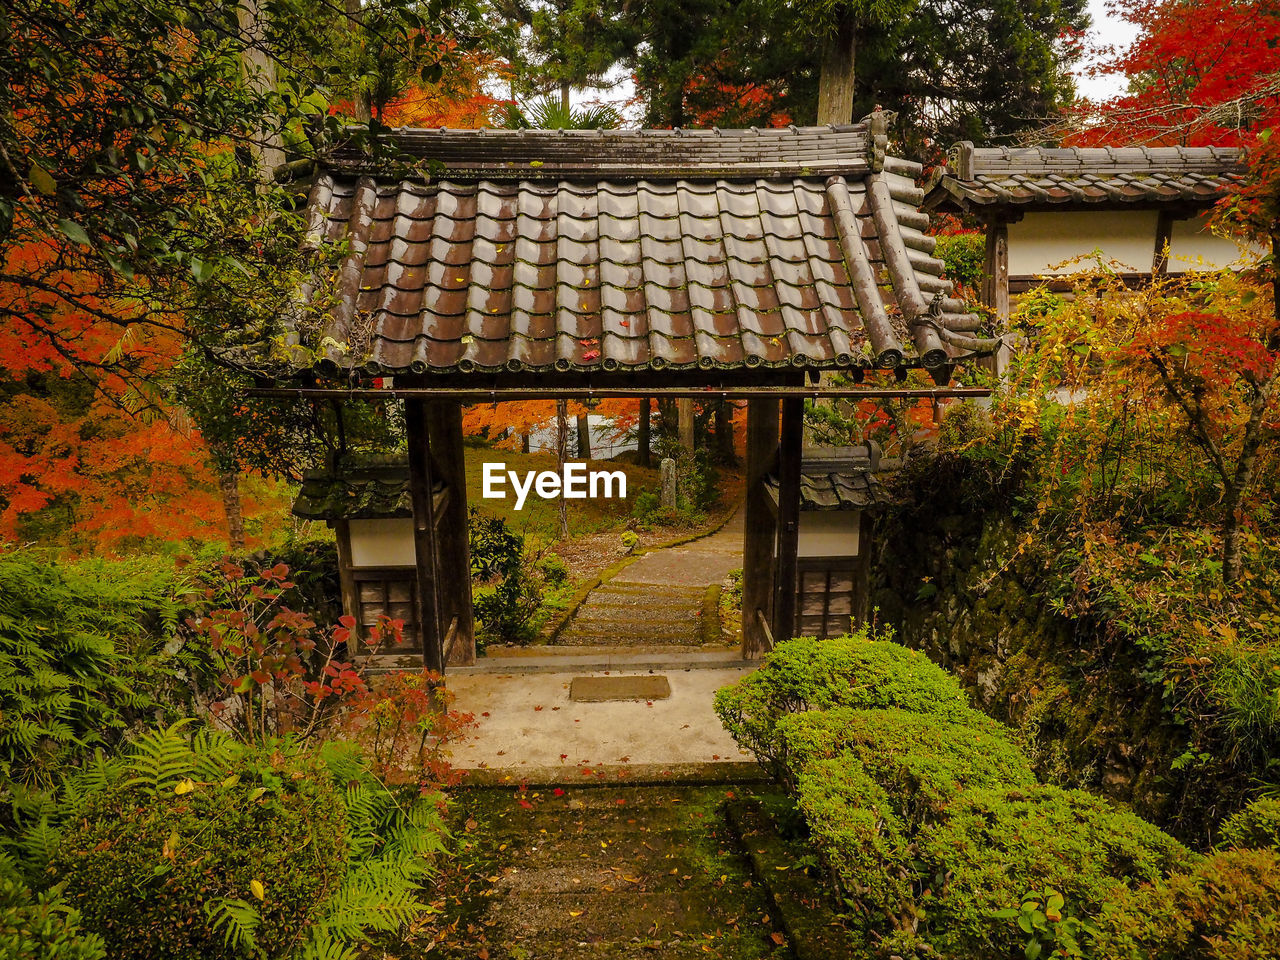 Autumn leaves of ryuonji temple in kyoto